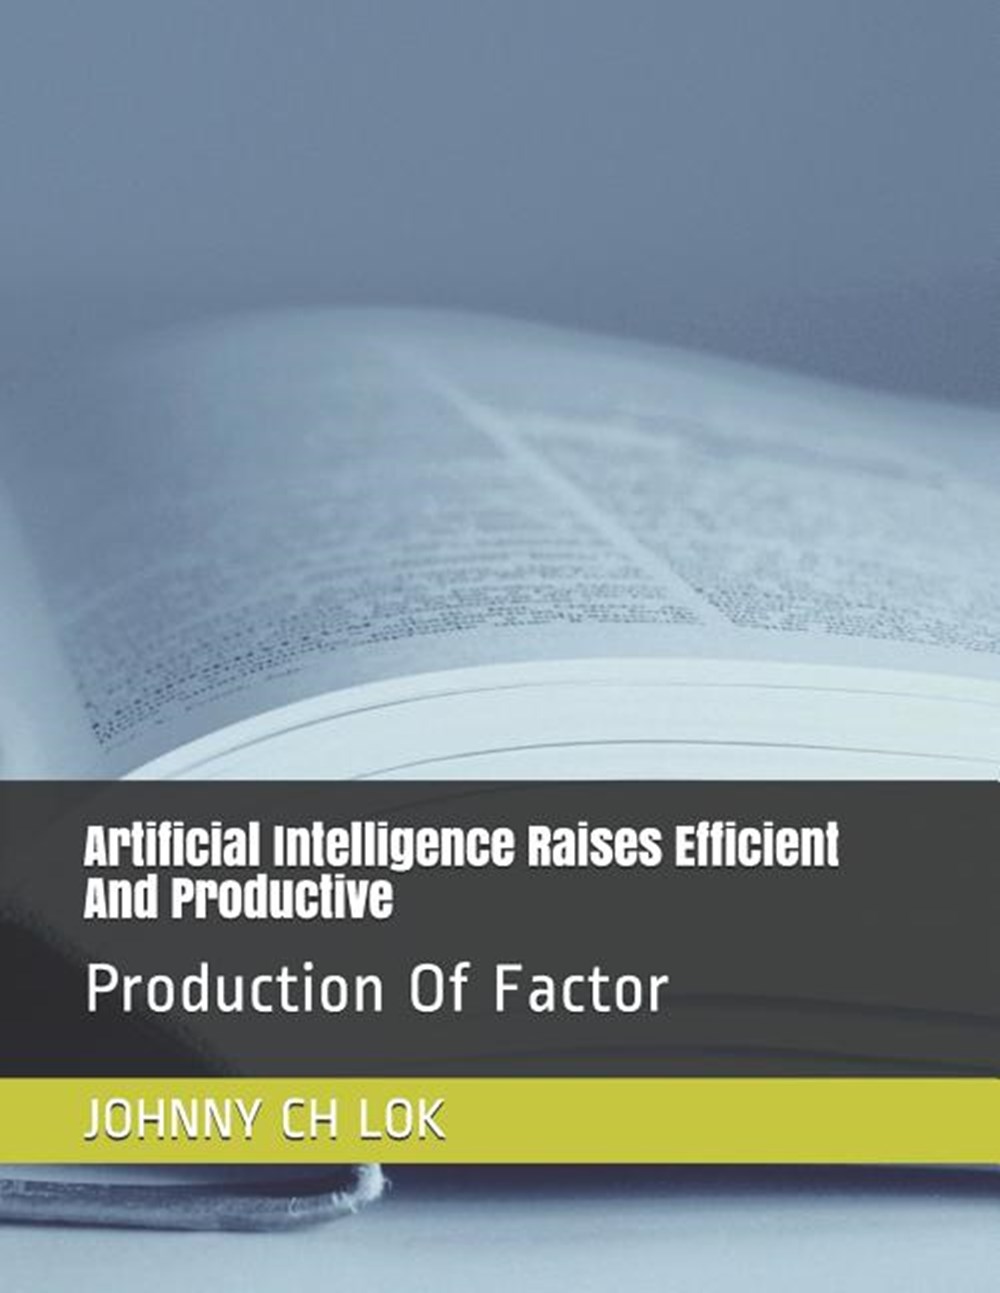 Artificial Intelligence Raises Efficient and Productive: Production of Factor